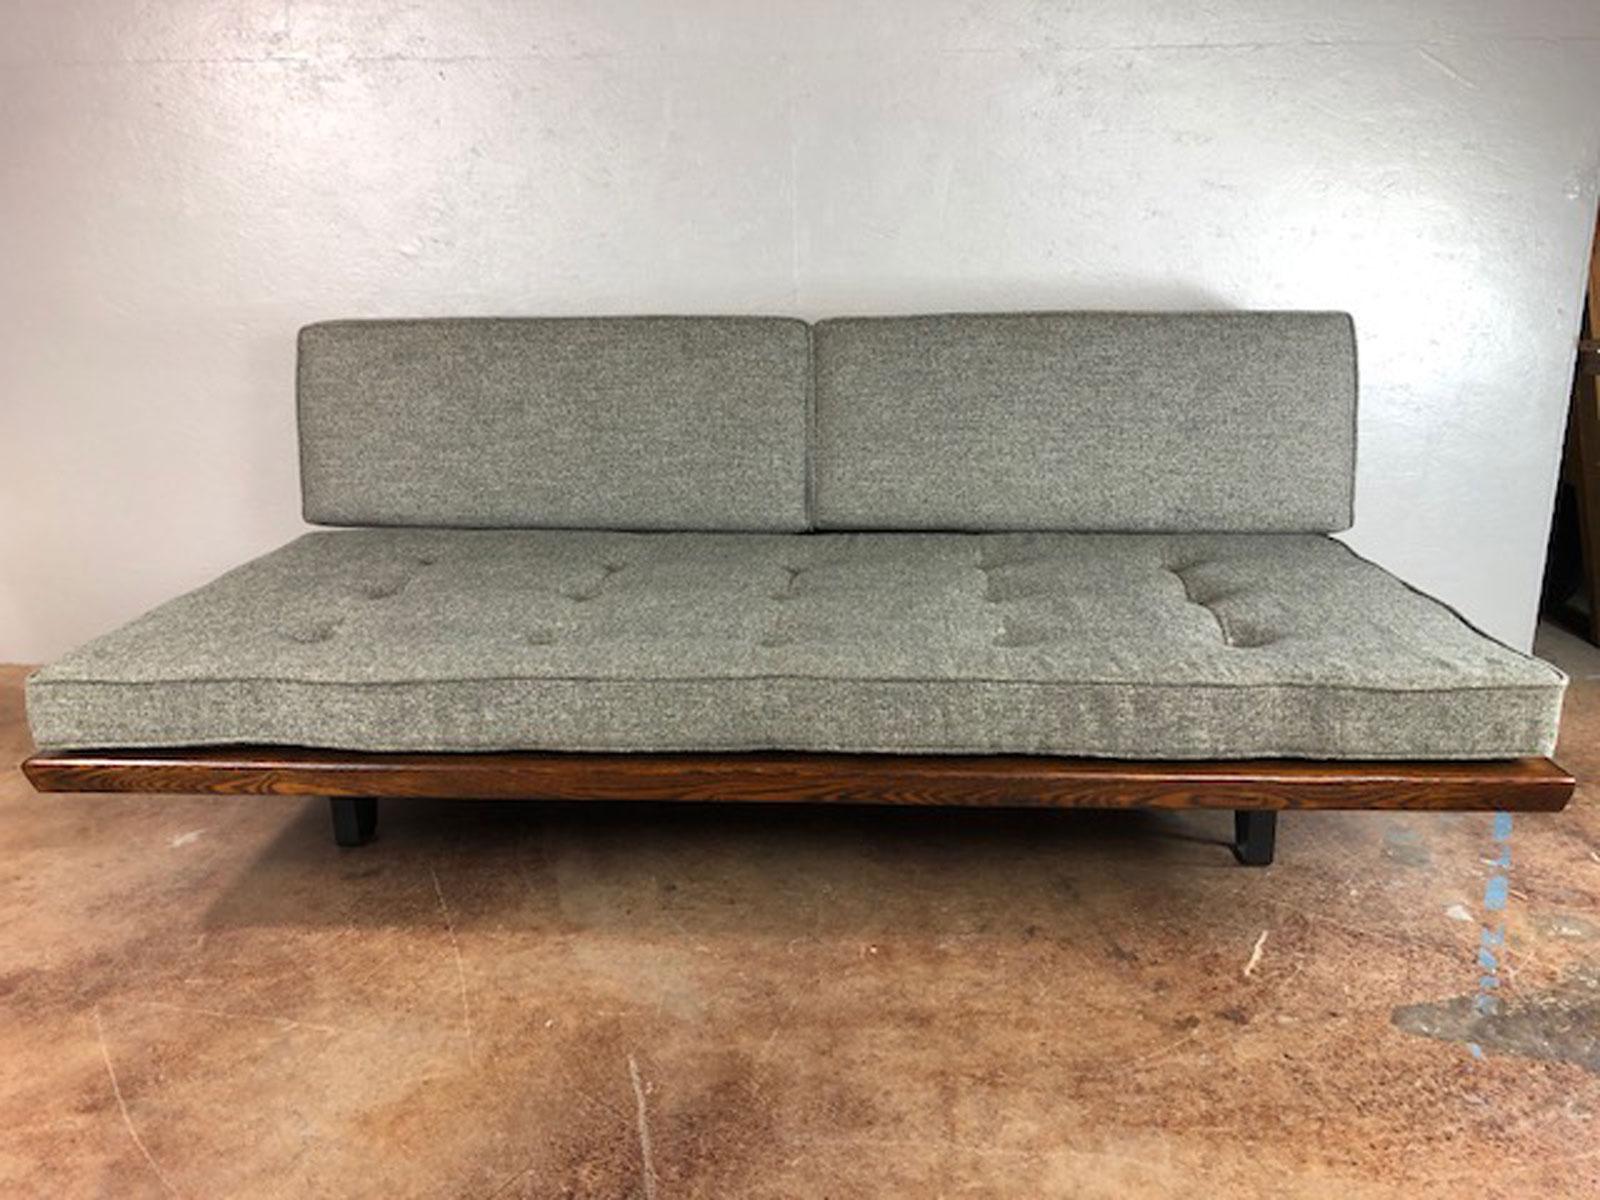 Superb daybed by Mel Bogart for Felmore. Reupholstered. Very well built and crafted. Bottom portion of daybed pulls forward, allowing a roomy extra sleeping surface, circa 1950s. Sofa bottom is 48